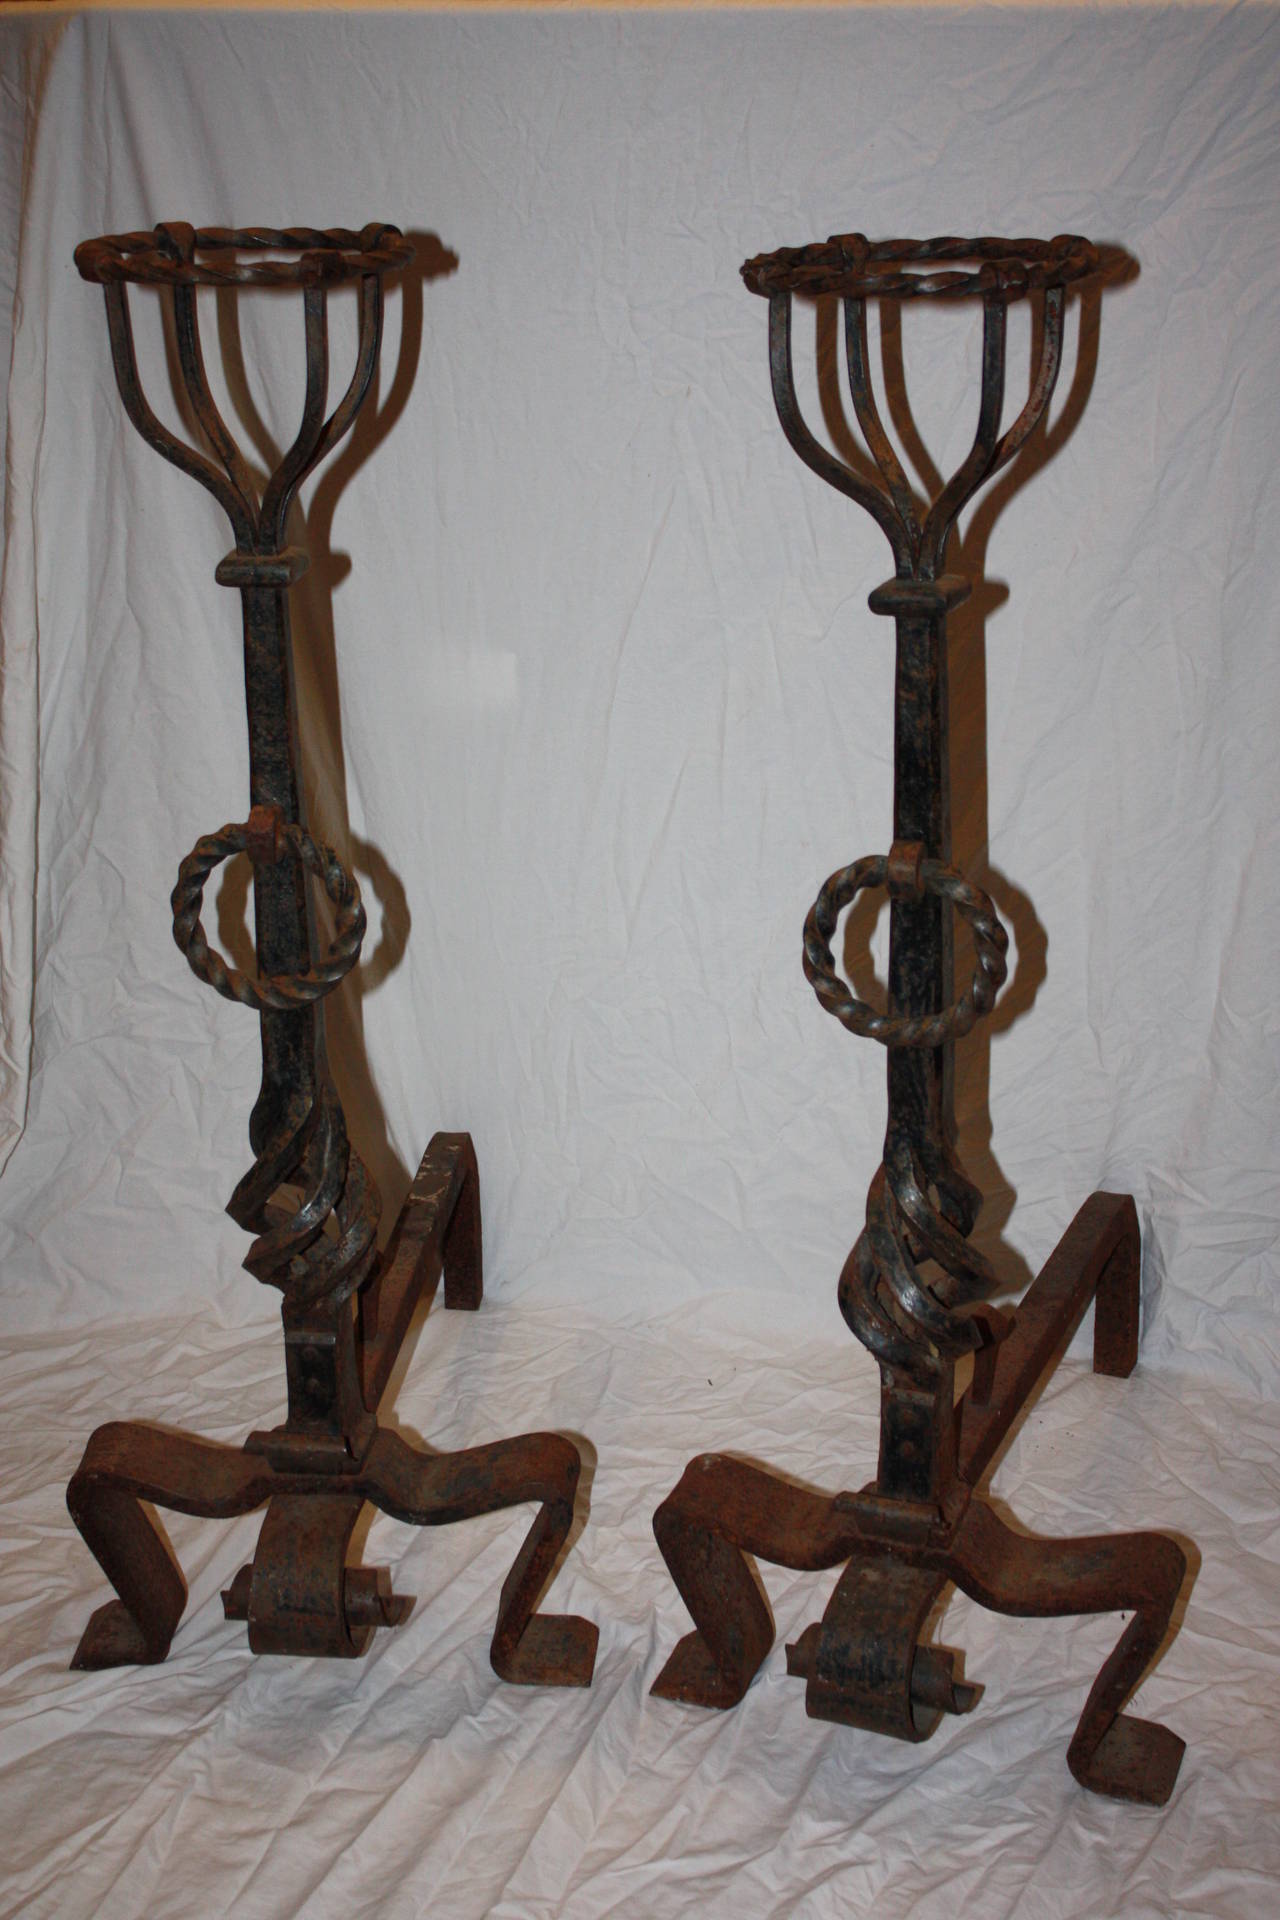 This is a really nice pair of wrought iron andirons I purchased in France.  They are very large in size.  The iron work is exceptional.  The baskets atop each andiron were used in cooking but are very attractive on their own or holding a flower